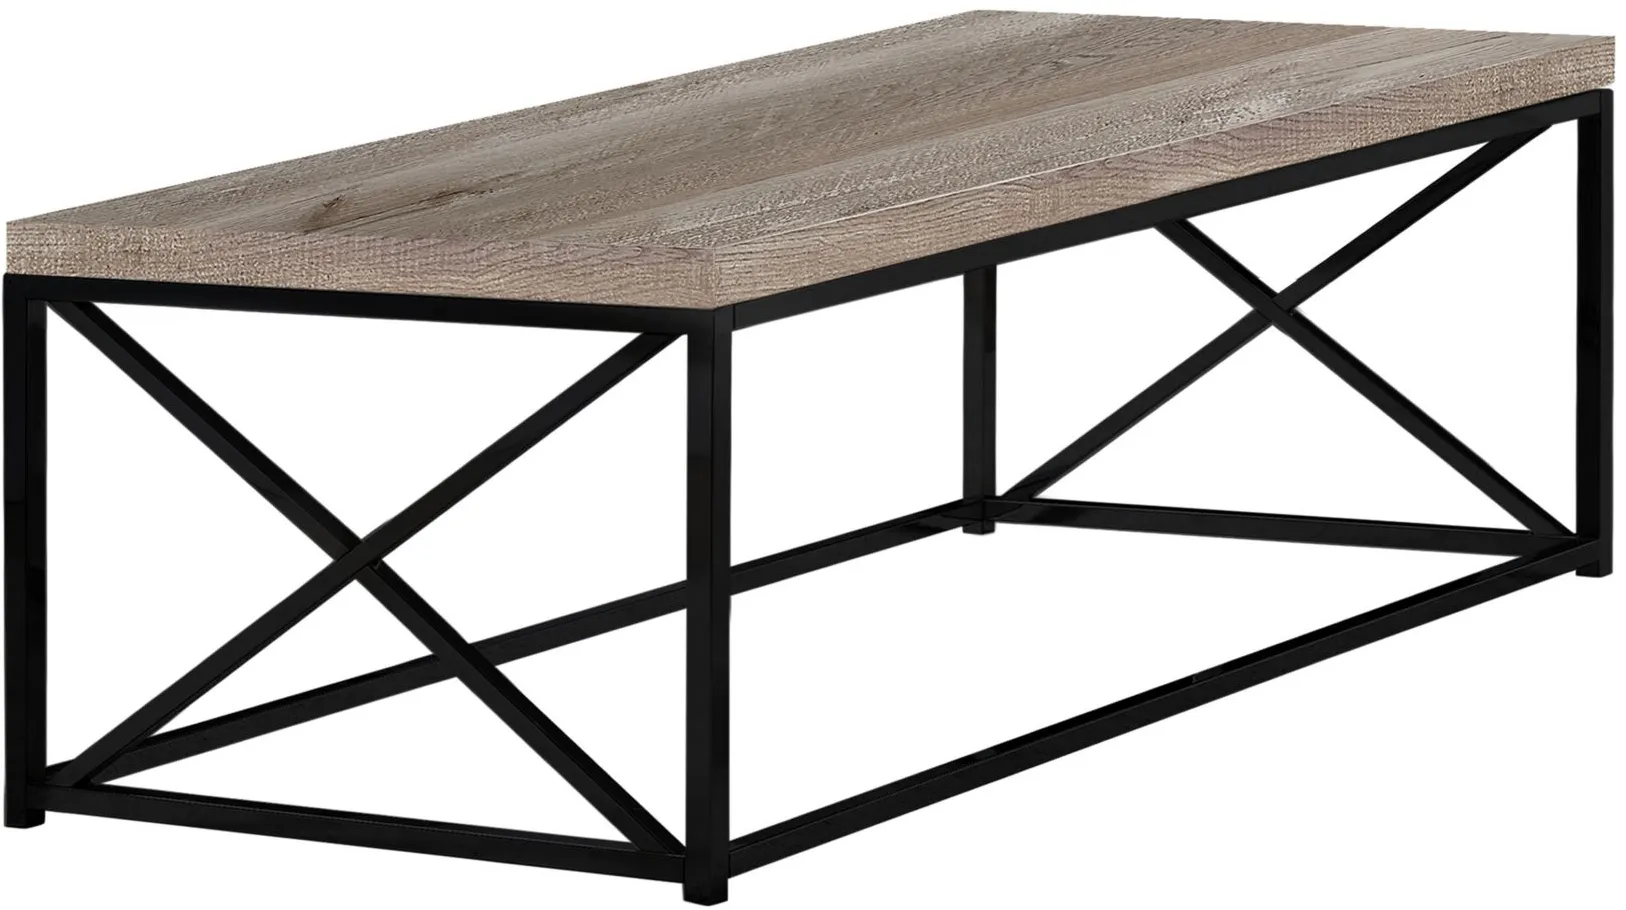 Haan Rectangular Cocktail Table in Taupe/Black by Monarch Specialties